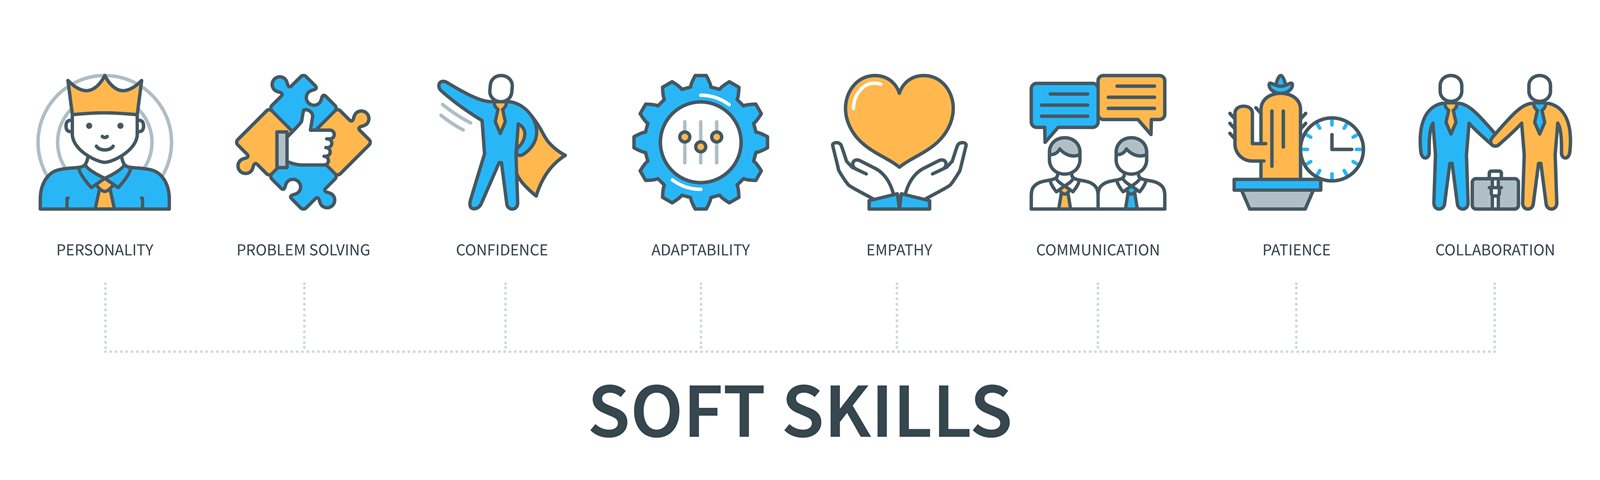 Graph of soft skills with icon images